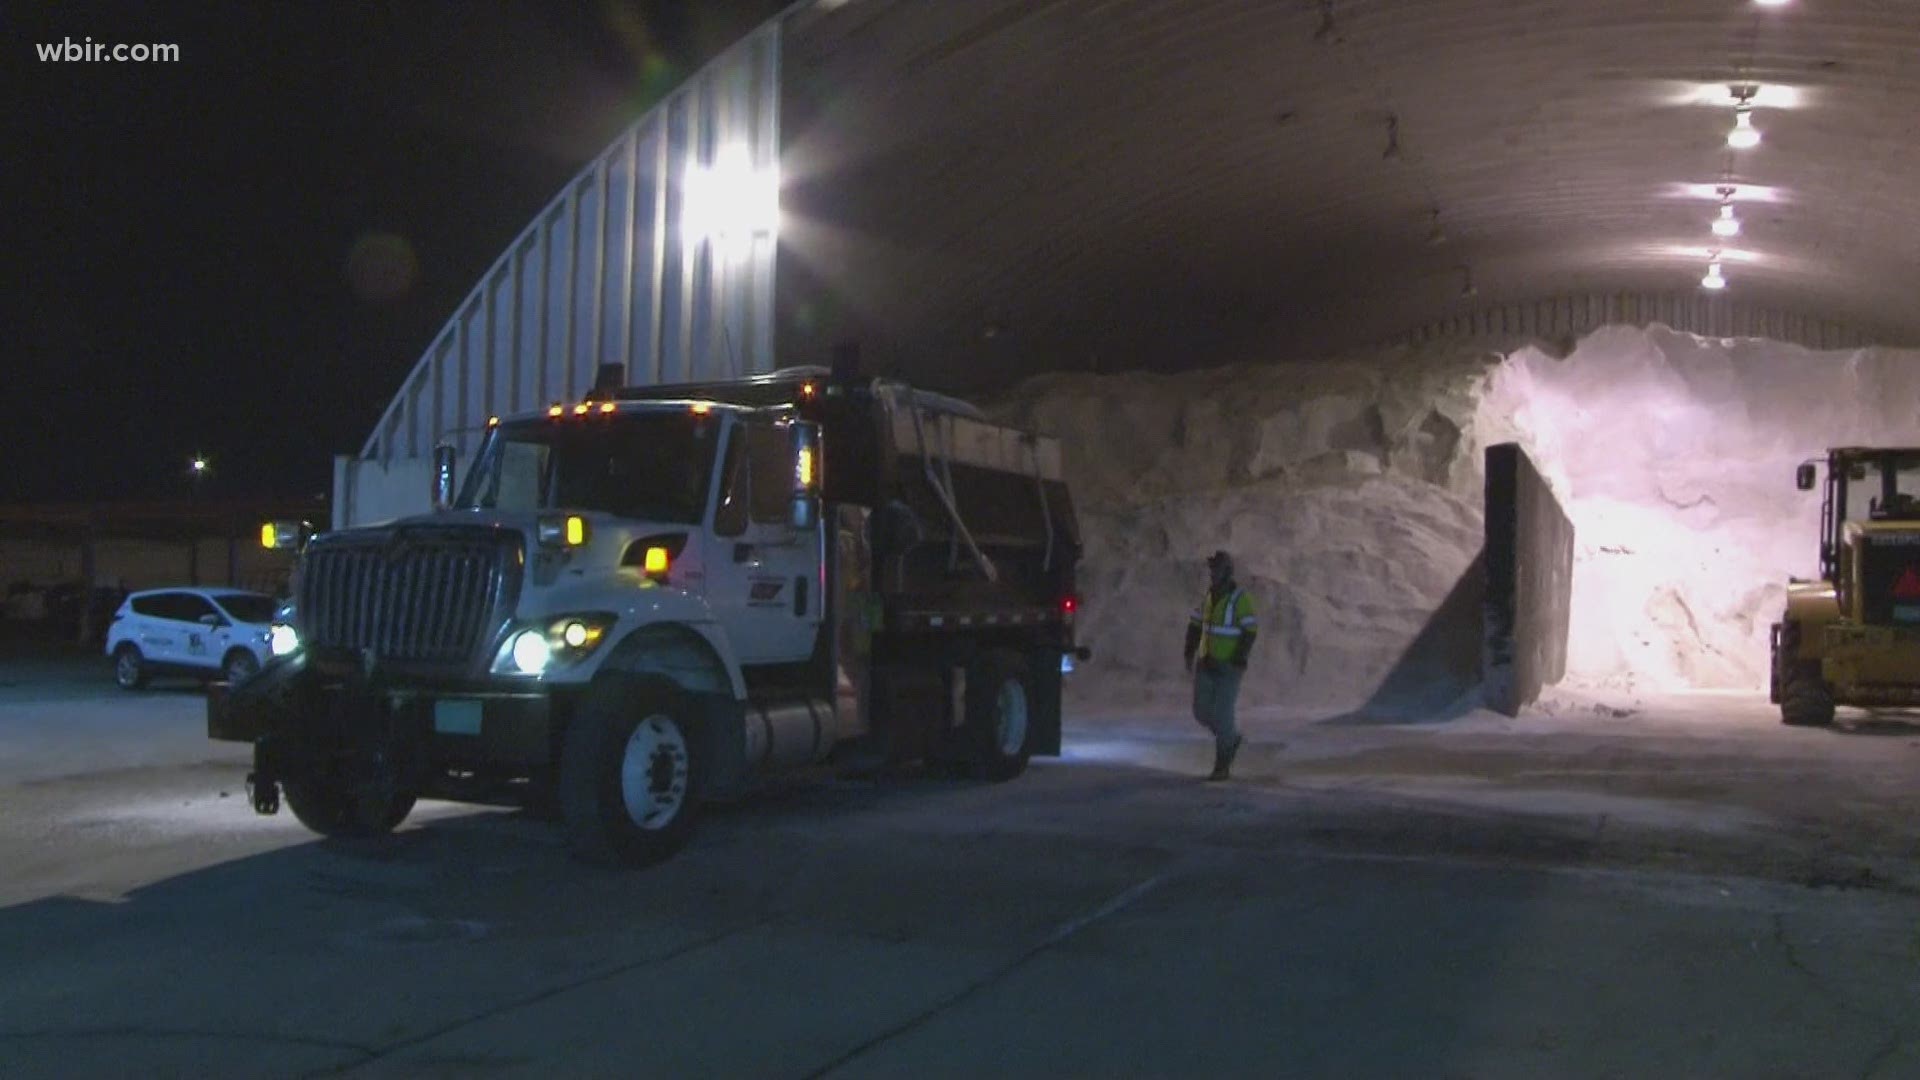 T-DOT crews are preparing for the winter weather. They started salting the roads Thursday night and will work early into Friday morning.